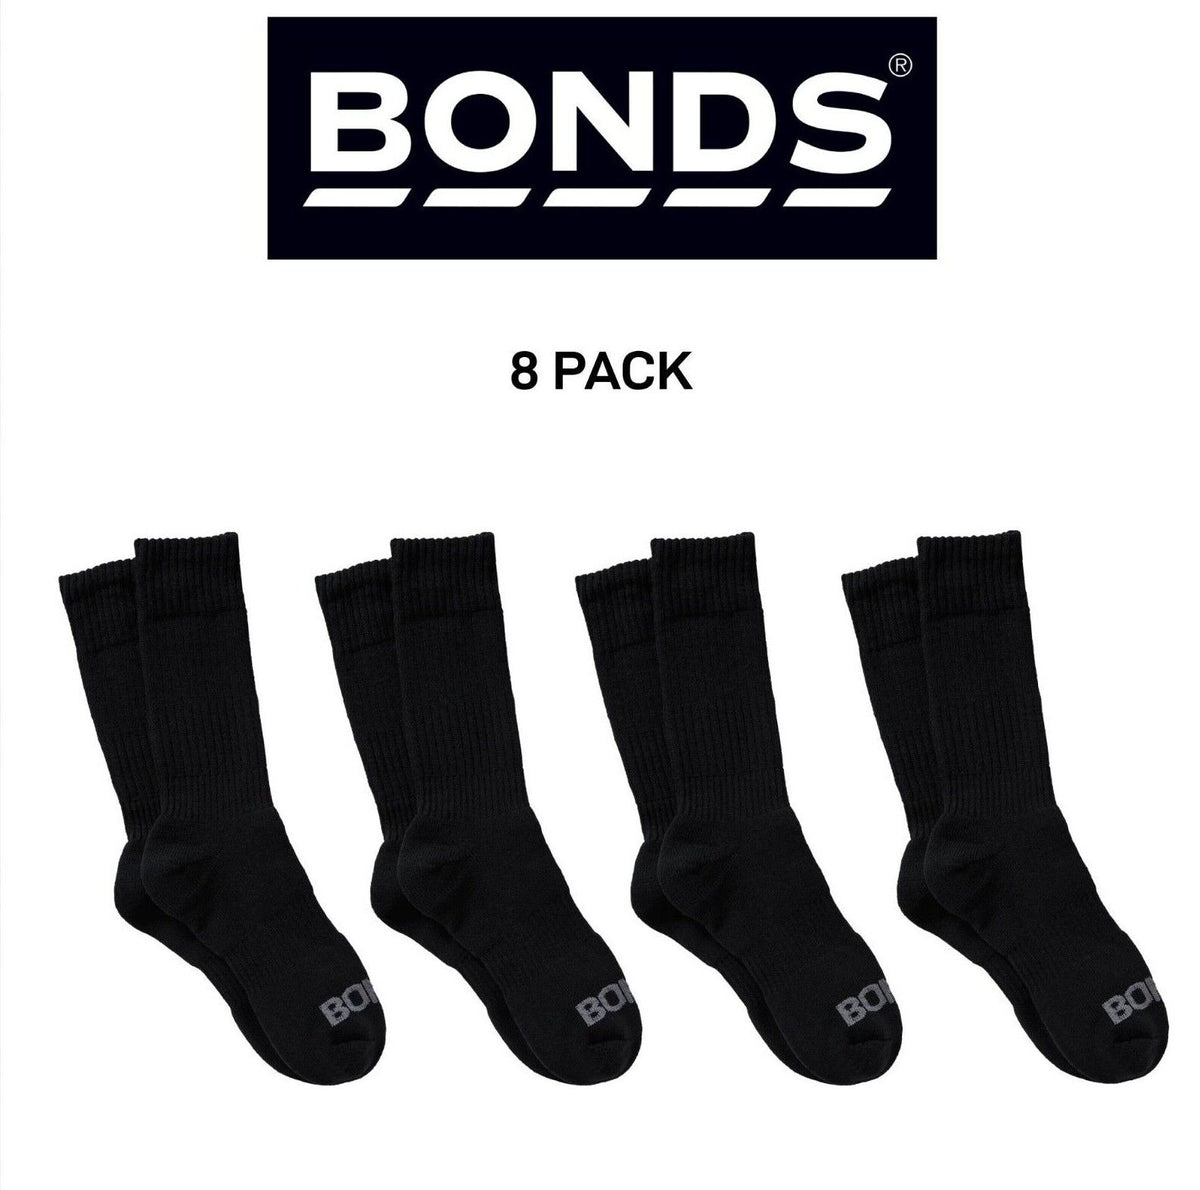 Bonds Mens Cotton Work Socks Durable Comfort and Warmth Fit 8 Pack SYPG2N